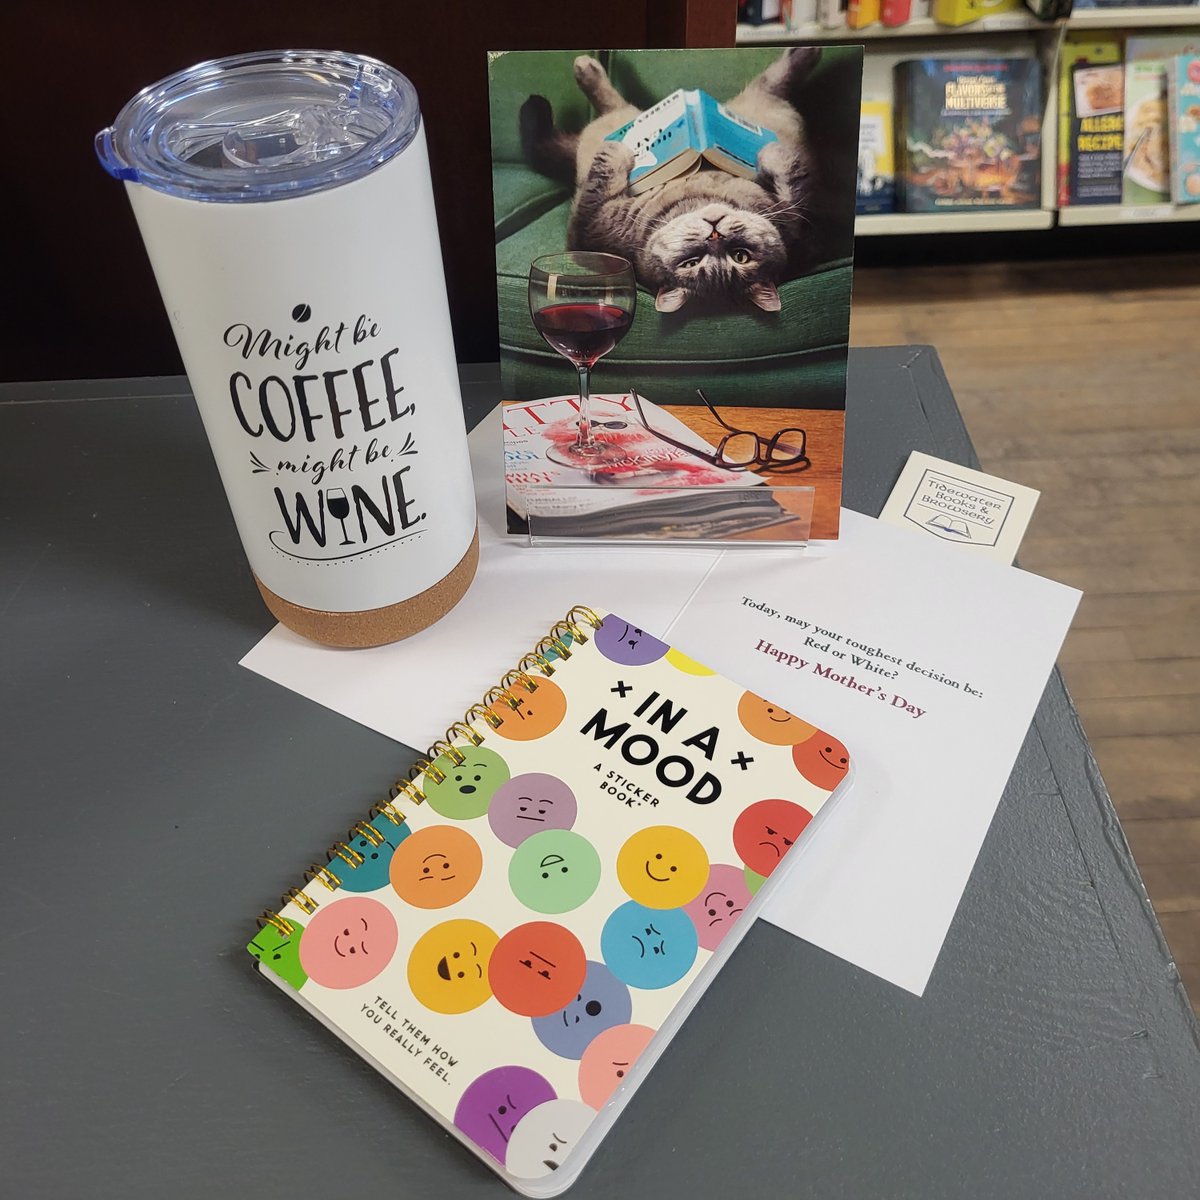 Mom, this weekend we hope the toughest decision you will have to make is what to put in your cup! You need to stay hydrated when you read!!

Visit us in person or online at tidewaterbooks.ca! 💕🇨🇦📚

#ShopSmall #ShopLocal #ShopNB #ShopIndie  #ThinkIndie #IndieBookstores